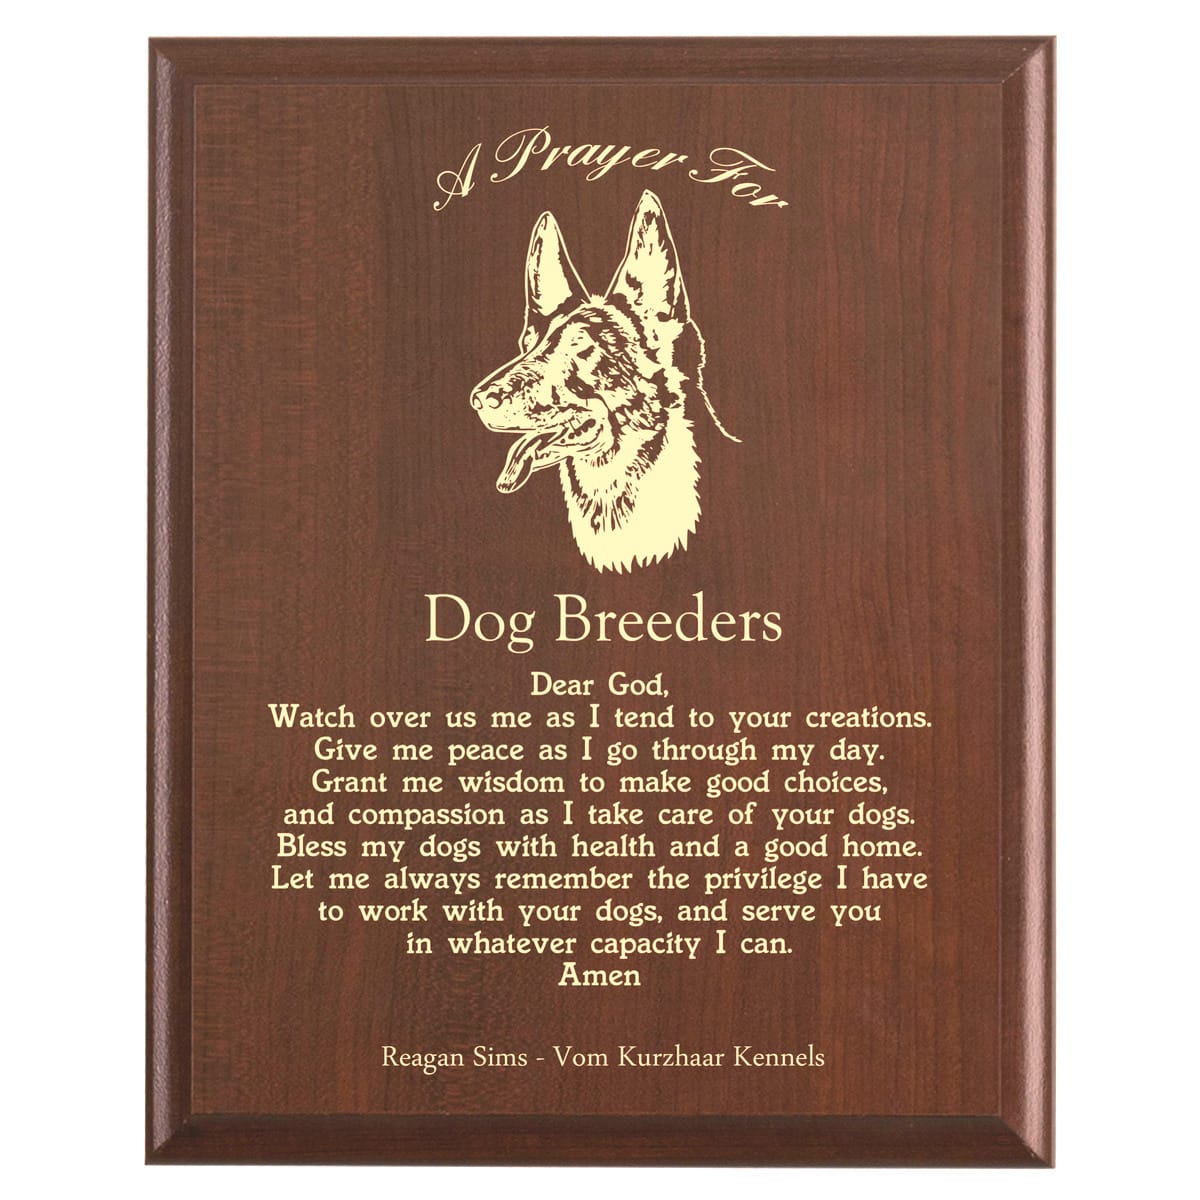 Plaque photo: Dog Breeders Prayer Plaque design with free personalization. Wood style finish with customized text.